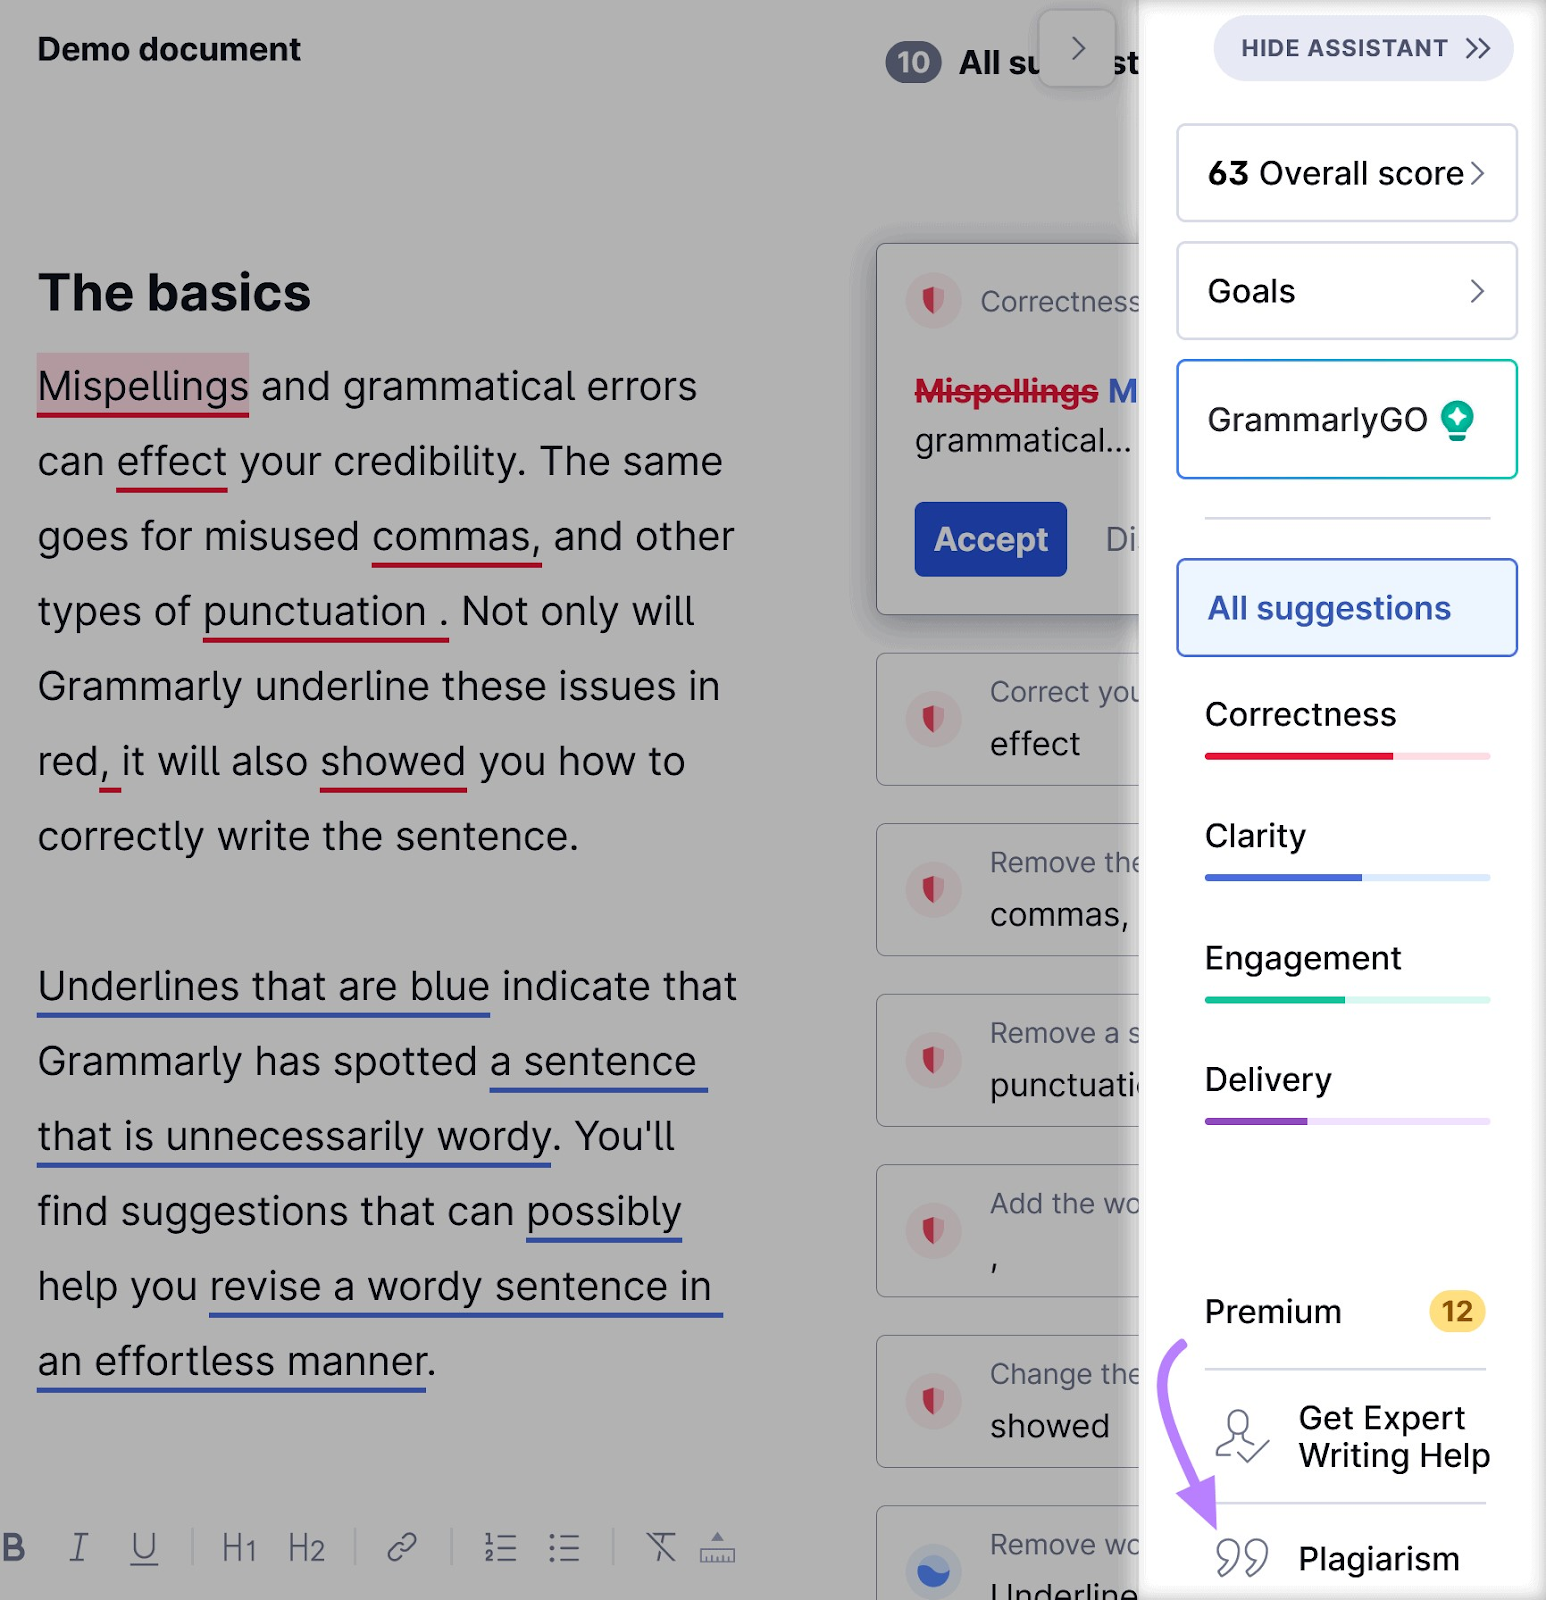 Grammarly document with “Plagiarism” button highlighted